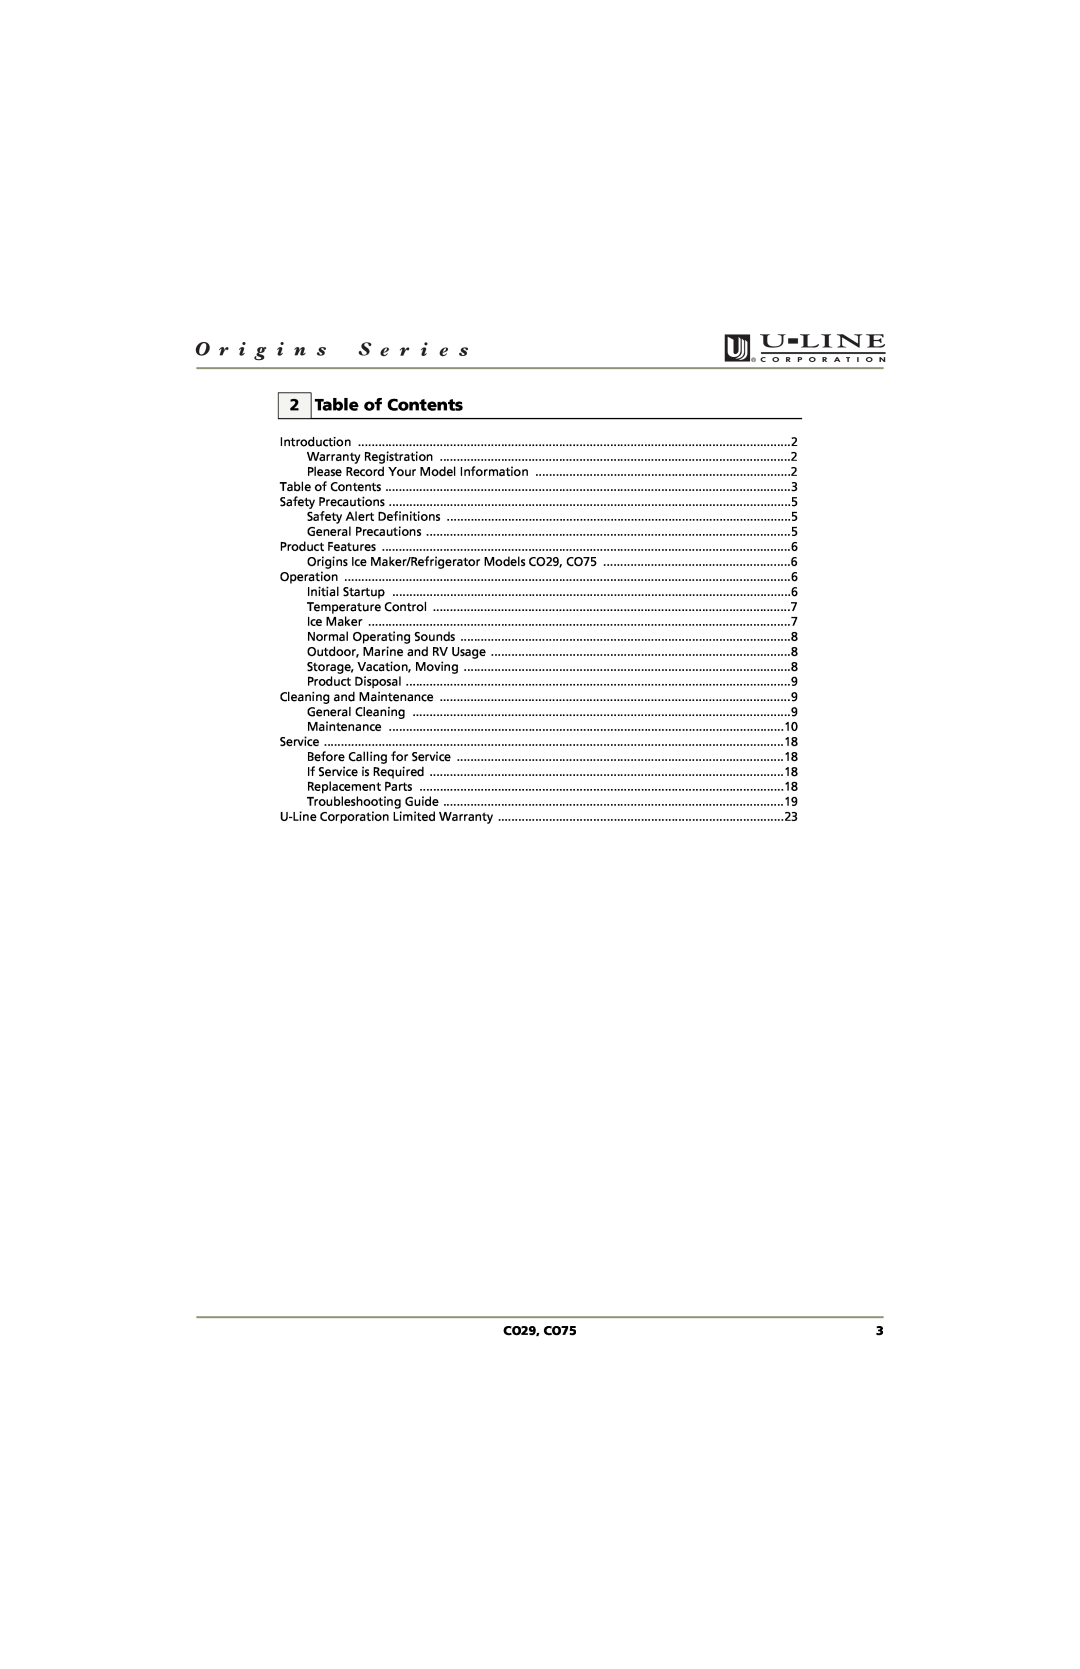 U-Line manual Table of Contents, CO29, CO75 